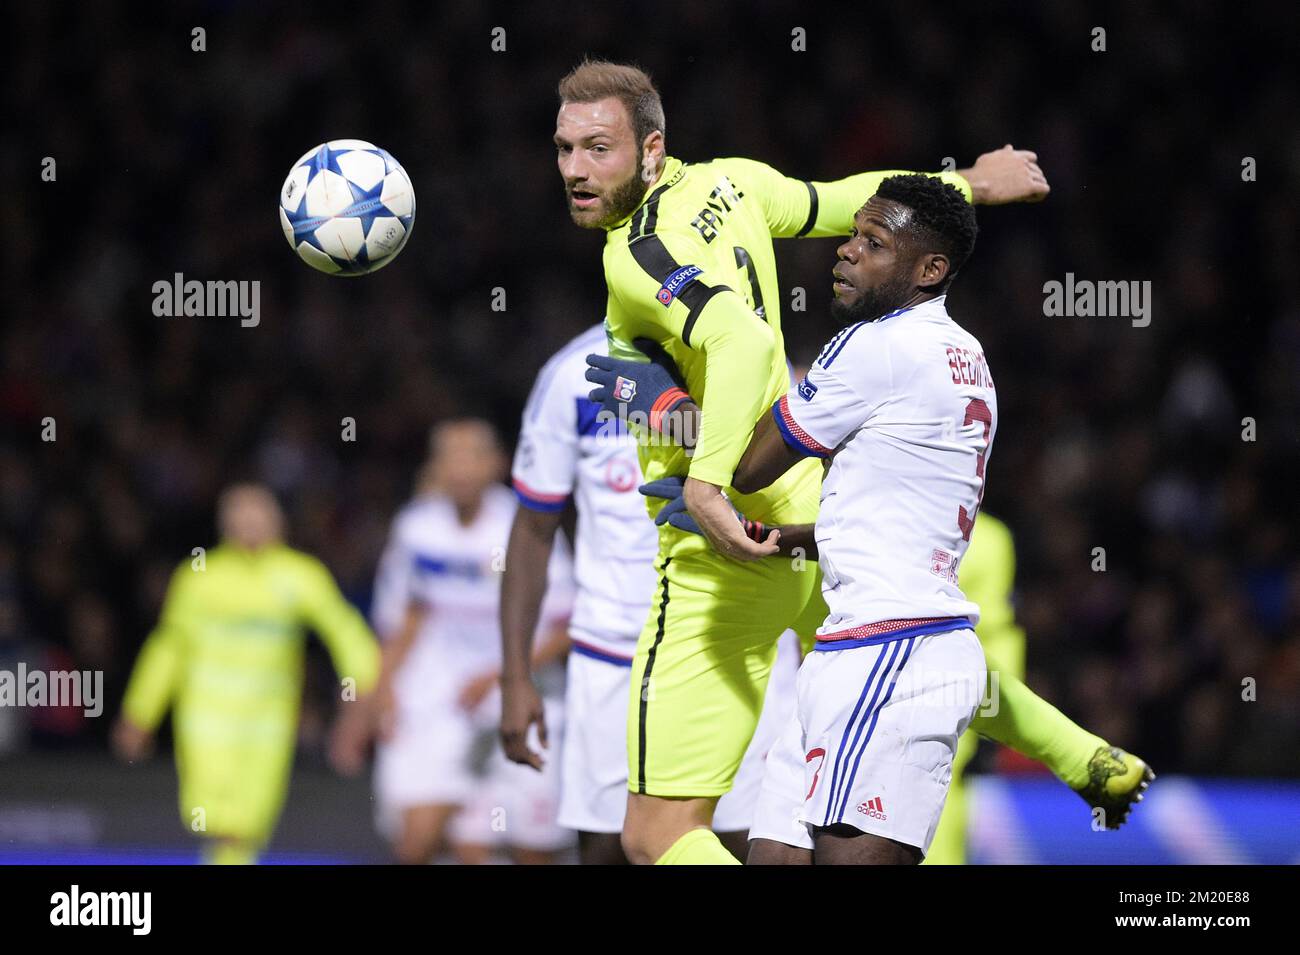 20151124 - LYON, FRANCE: Gent's Laurent Depoitre and Lyon's Henri Bedimo fight for the ball during the game between French club Olympique Lyonnais and Belgian first league soccer team KAA Gent, the fifth game in the group H, in the group stage of the Uefa Champions League competition, in Lyon, France, Tuesday 24 November 2015. BELGA PHOTO YORICK JANSENS Stock Photo